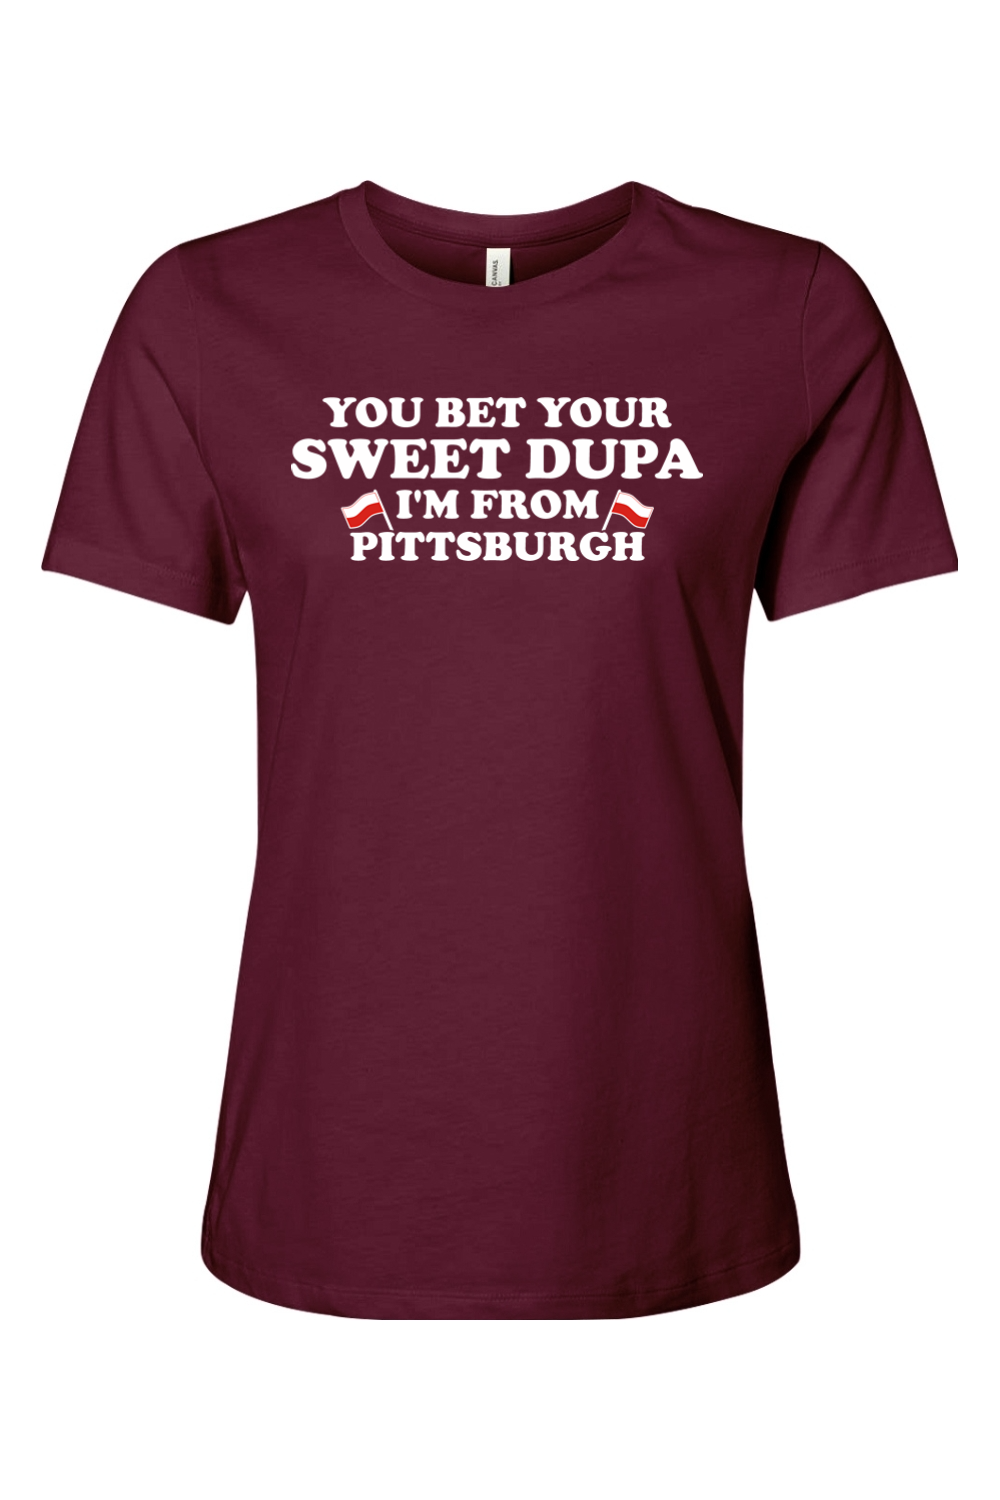 You Bet Your Sweet Dupa I'm From Pittsburgh - Ladies Tee - Yinzylvania